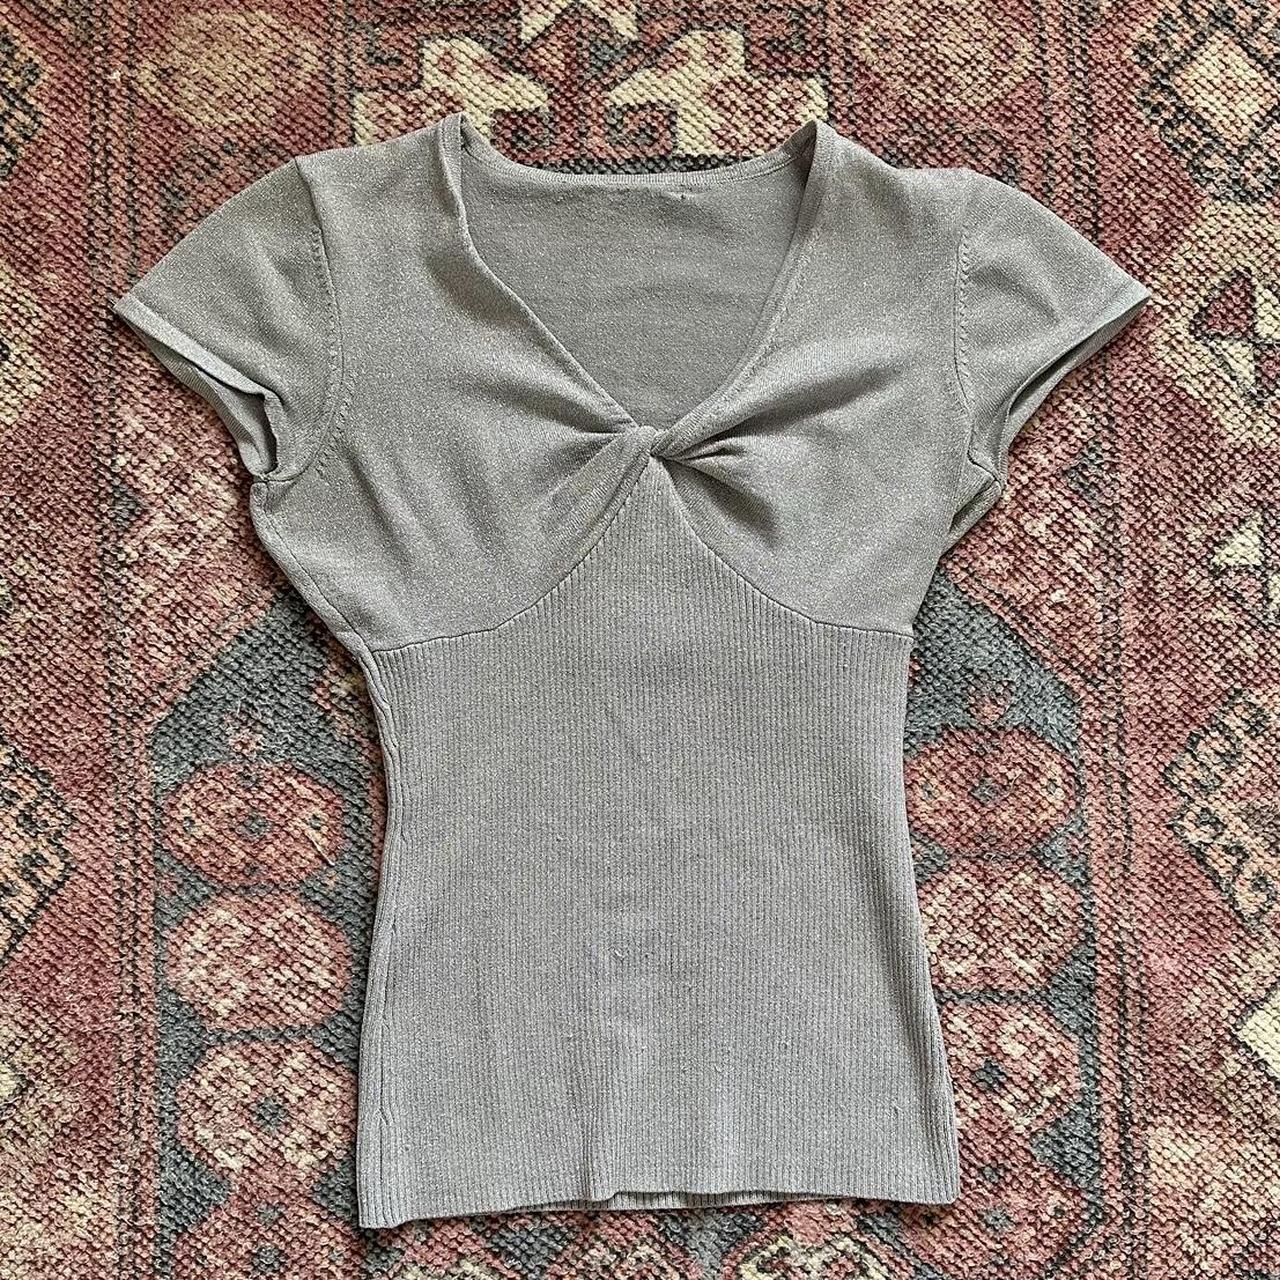 INC International Concepts Women's Grey and Silver Blouse